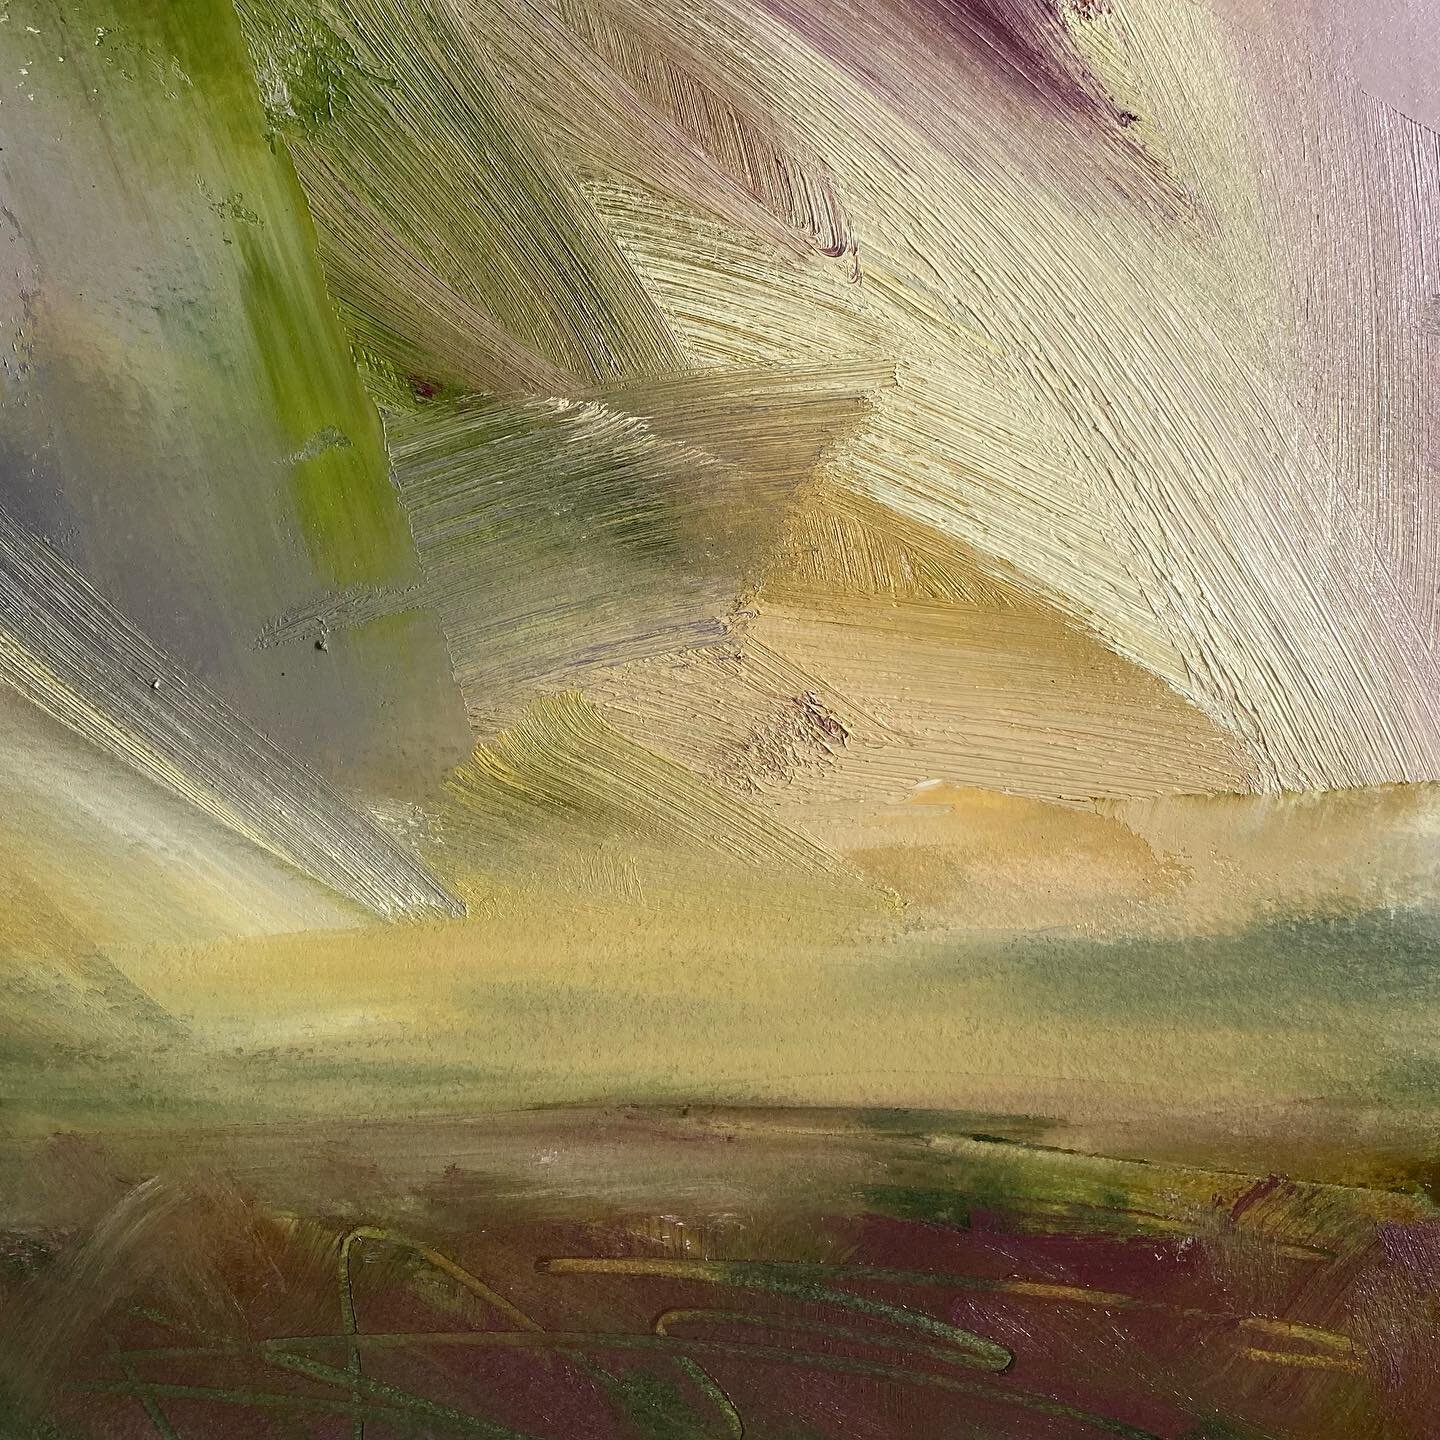 We are into the school summer holidays here, so not much studio time to be had for the next few weeks. This week I managed just one painting session where I worked on some little oil sketches. I think the colours of the Pembrokeshire landscape, with 